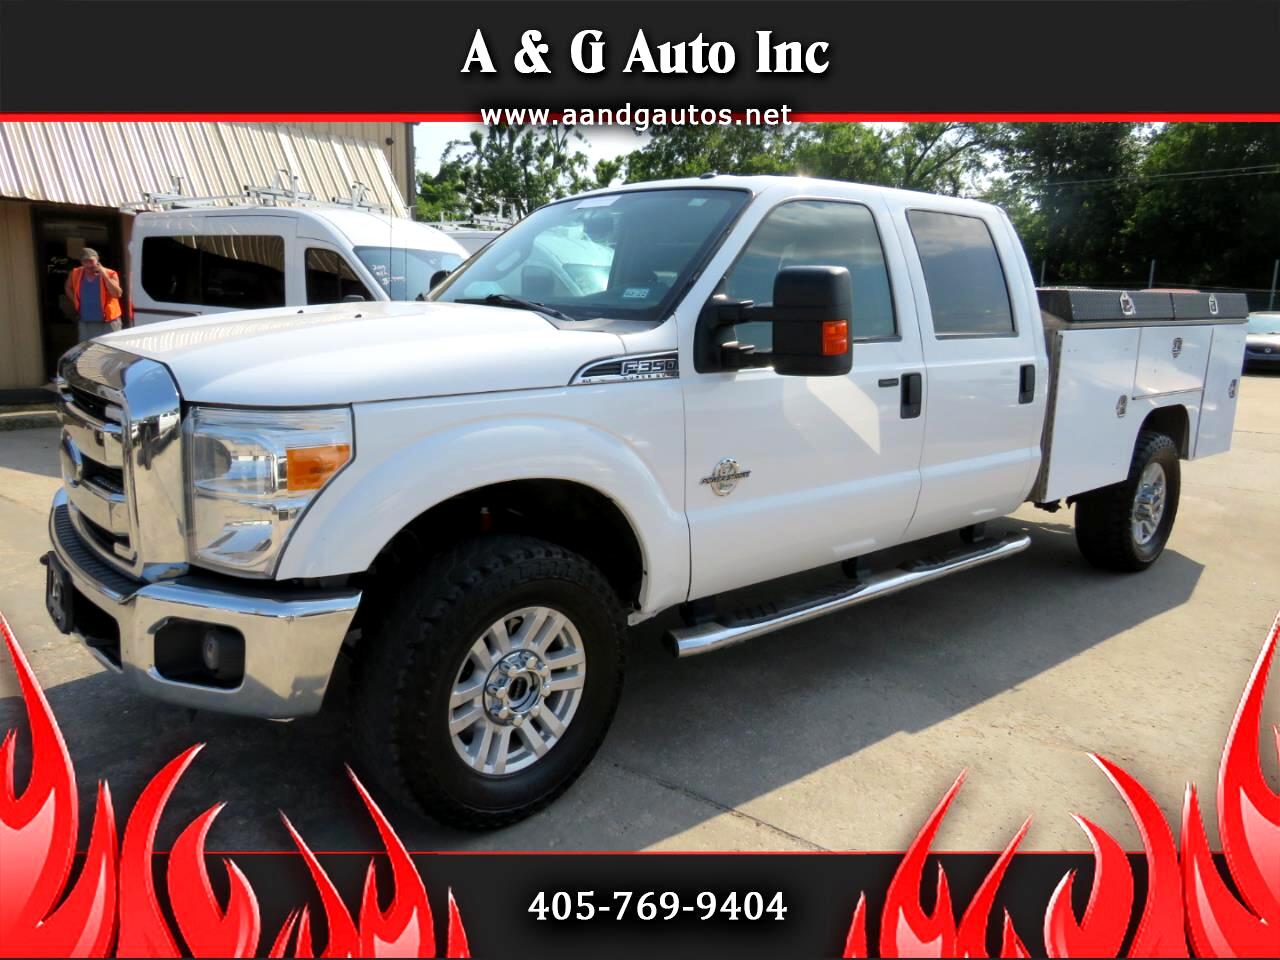 2015 Ford F-350 SD for sale in Oklahoma City OK 73141 by A & G Auto Inc